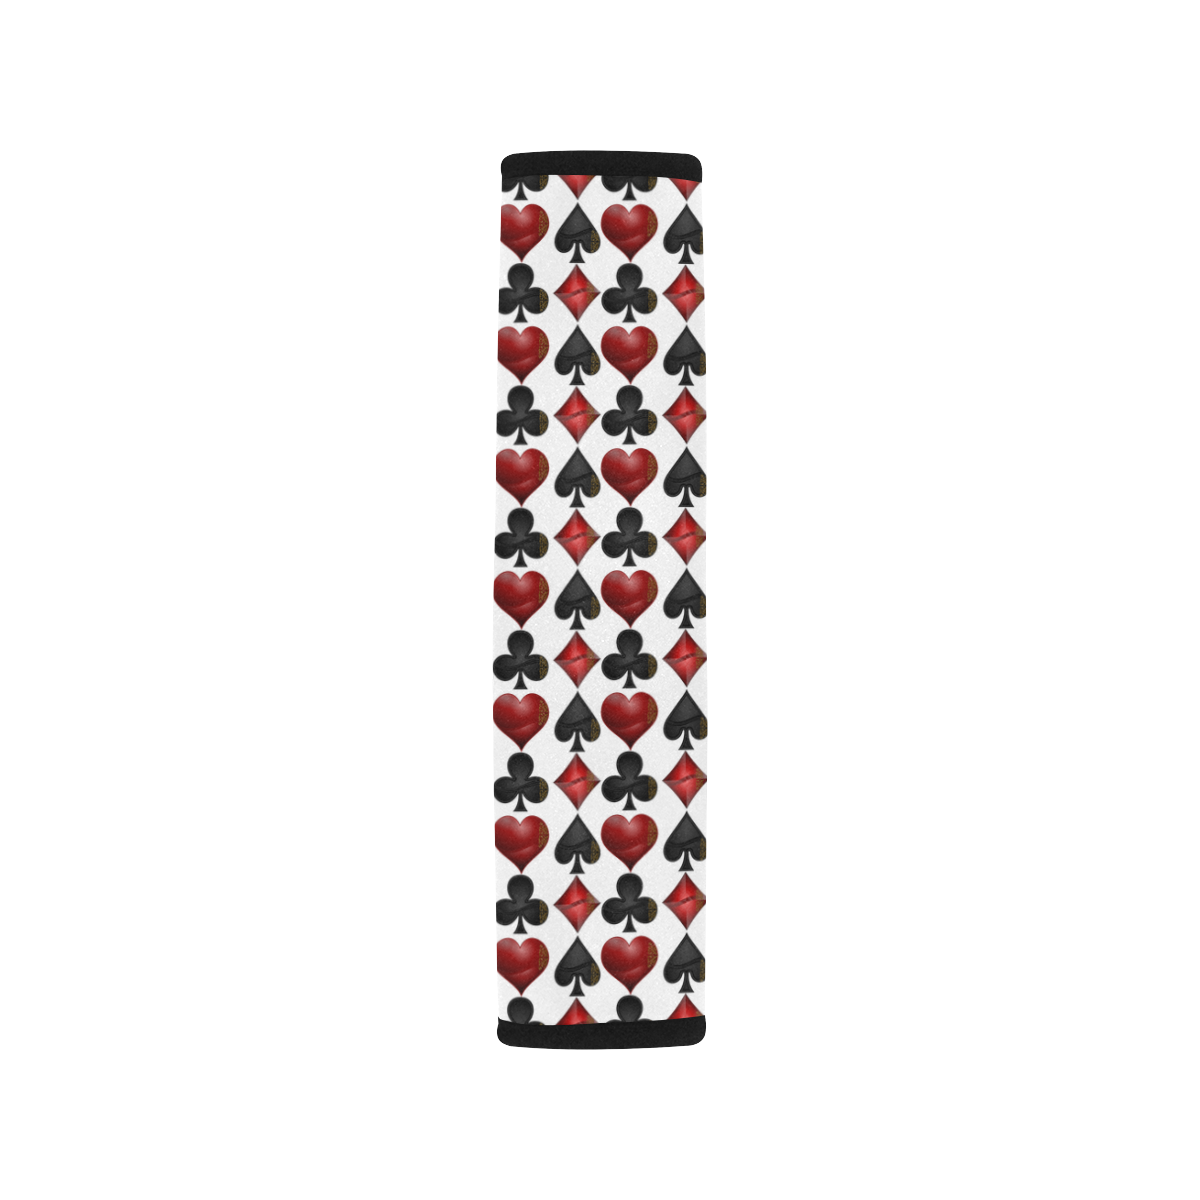 Las Vegas Black and Red Casino Poker Card Shapes on White Car Seat Belt Cover 7''x10''